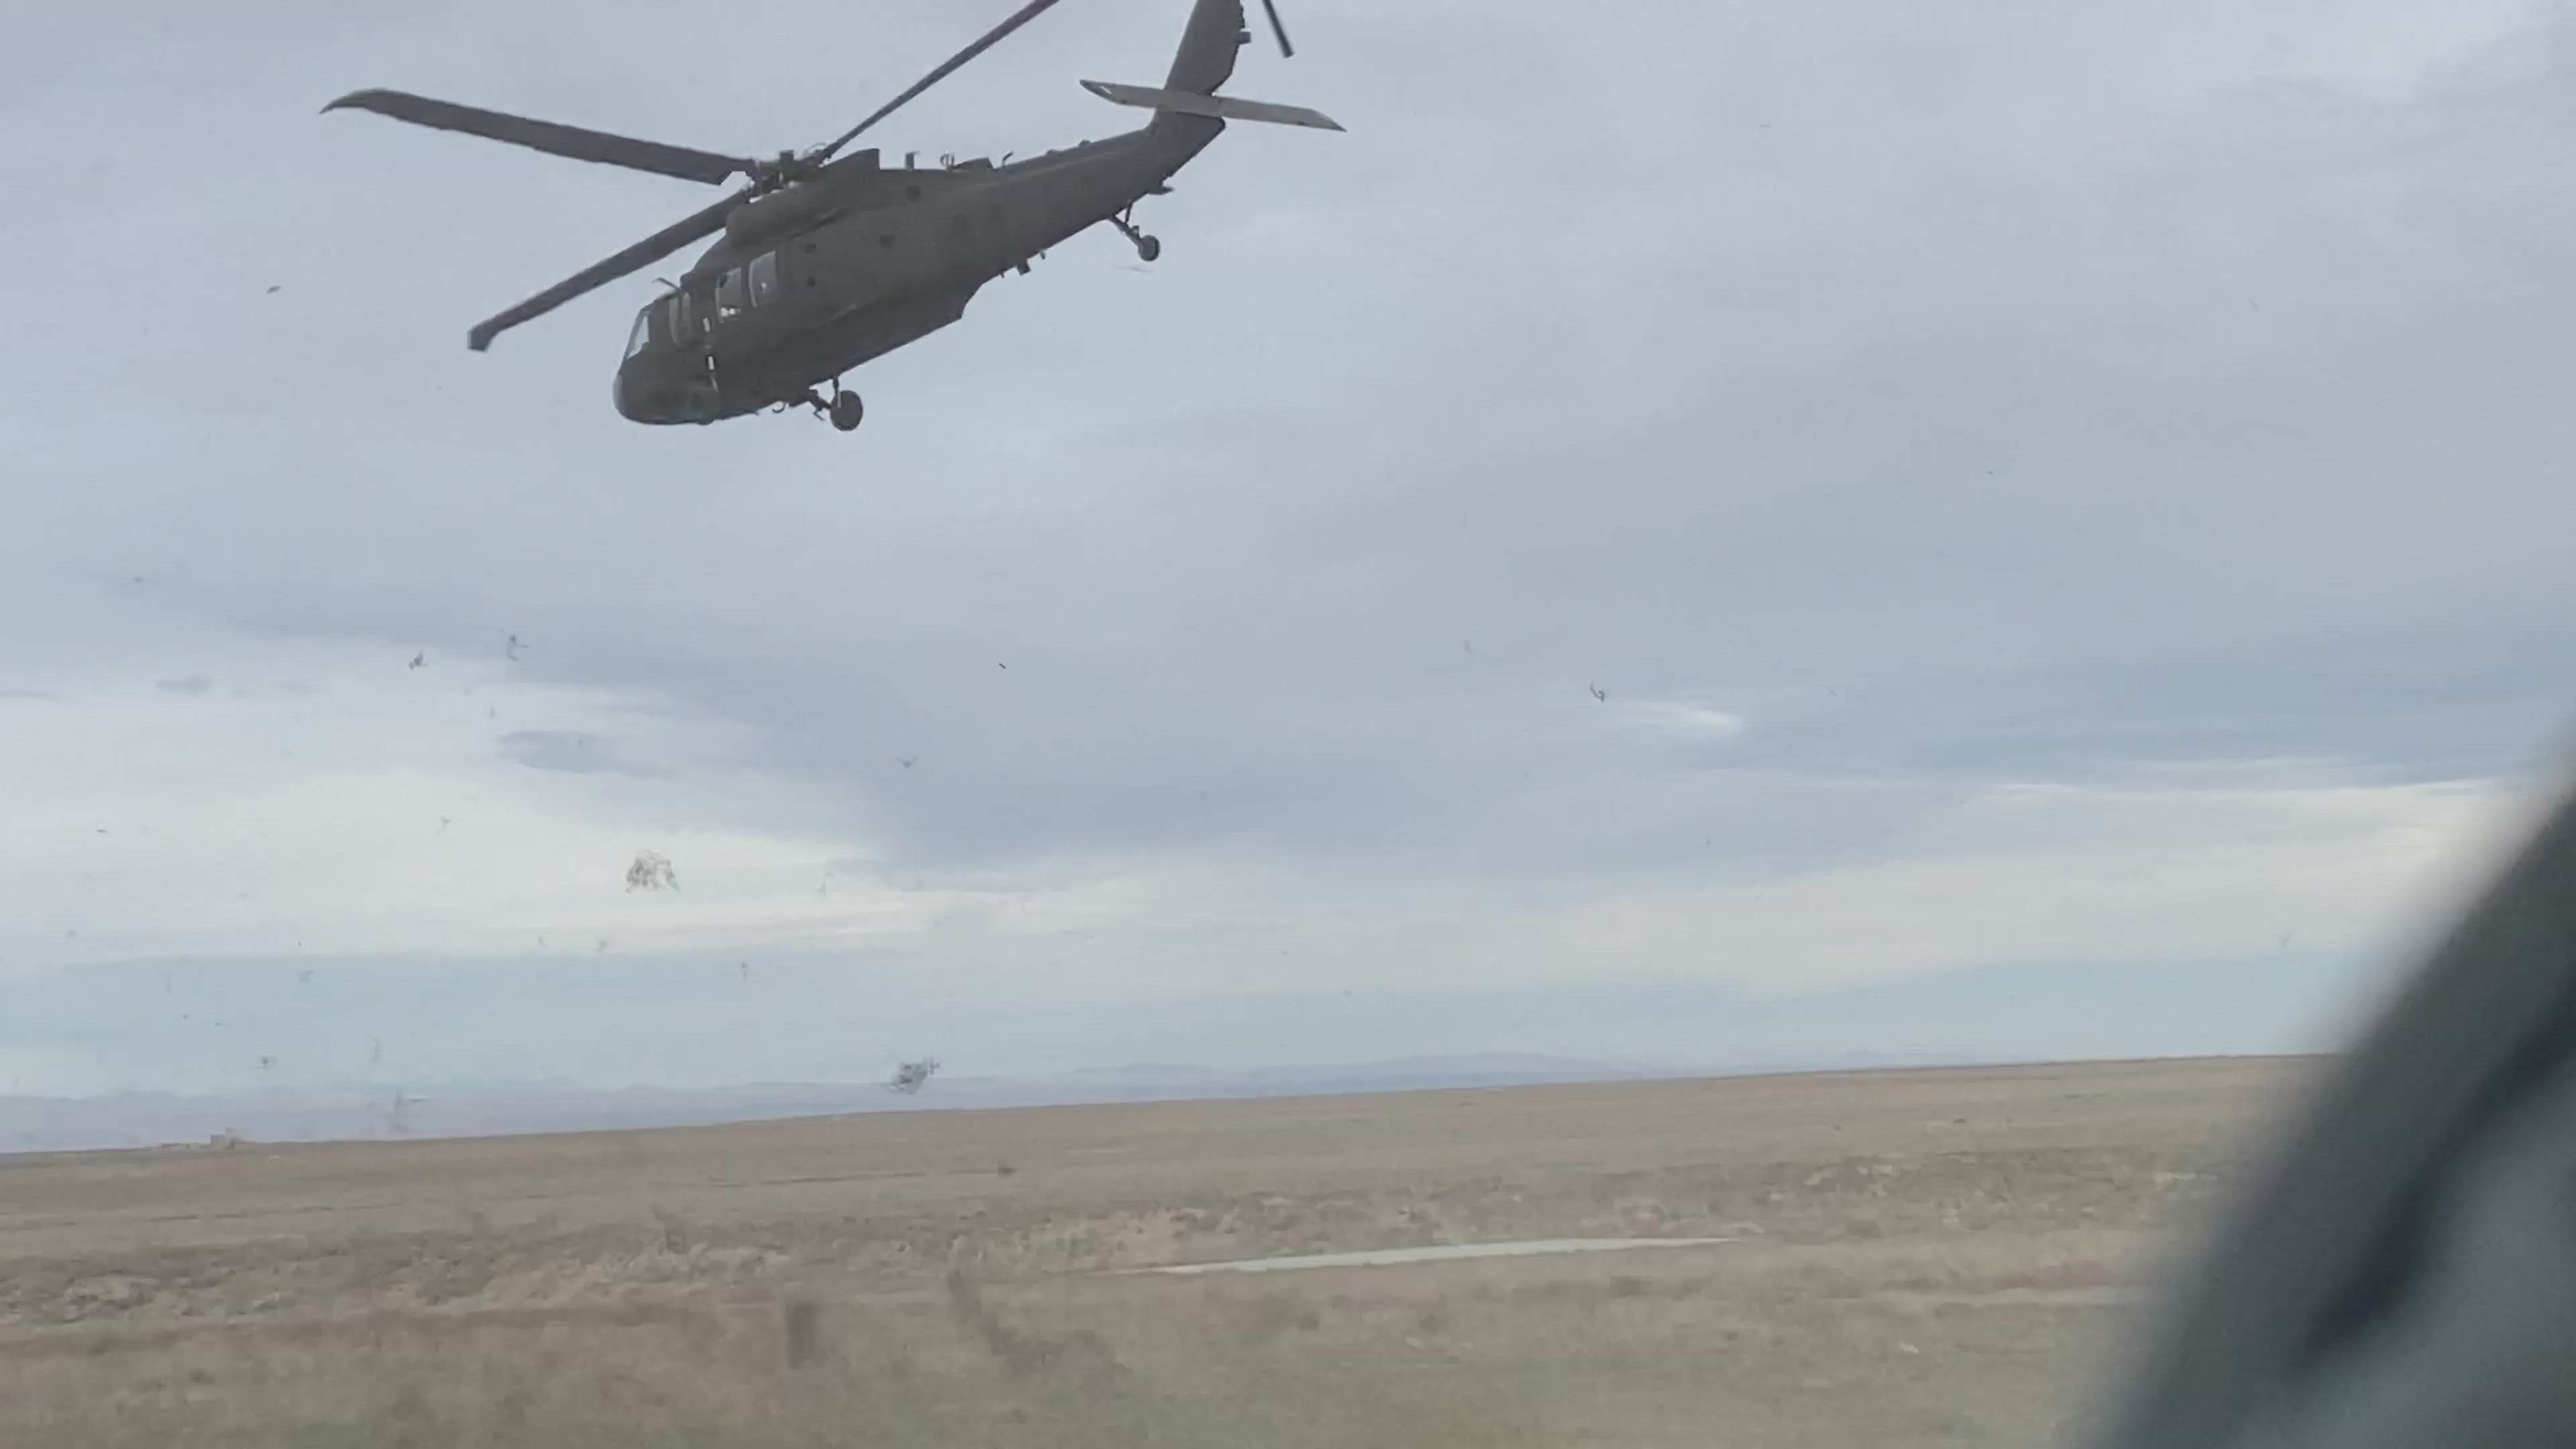 An Army Helicopter landing to conclude one session of Combat Search and Rescue Training during Gunfighter Flag 21-2 at Mountain Home AFB's Range (Silver Creek Range.)